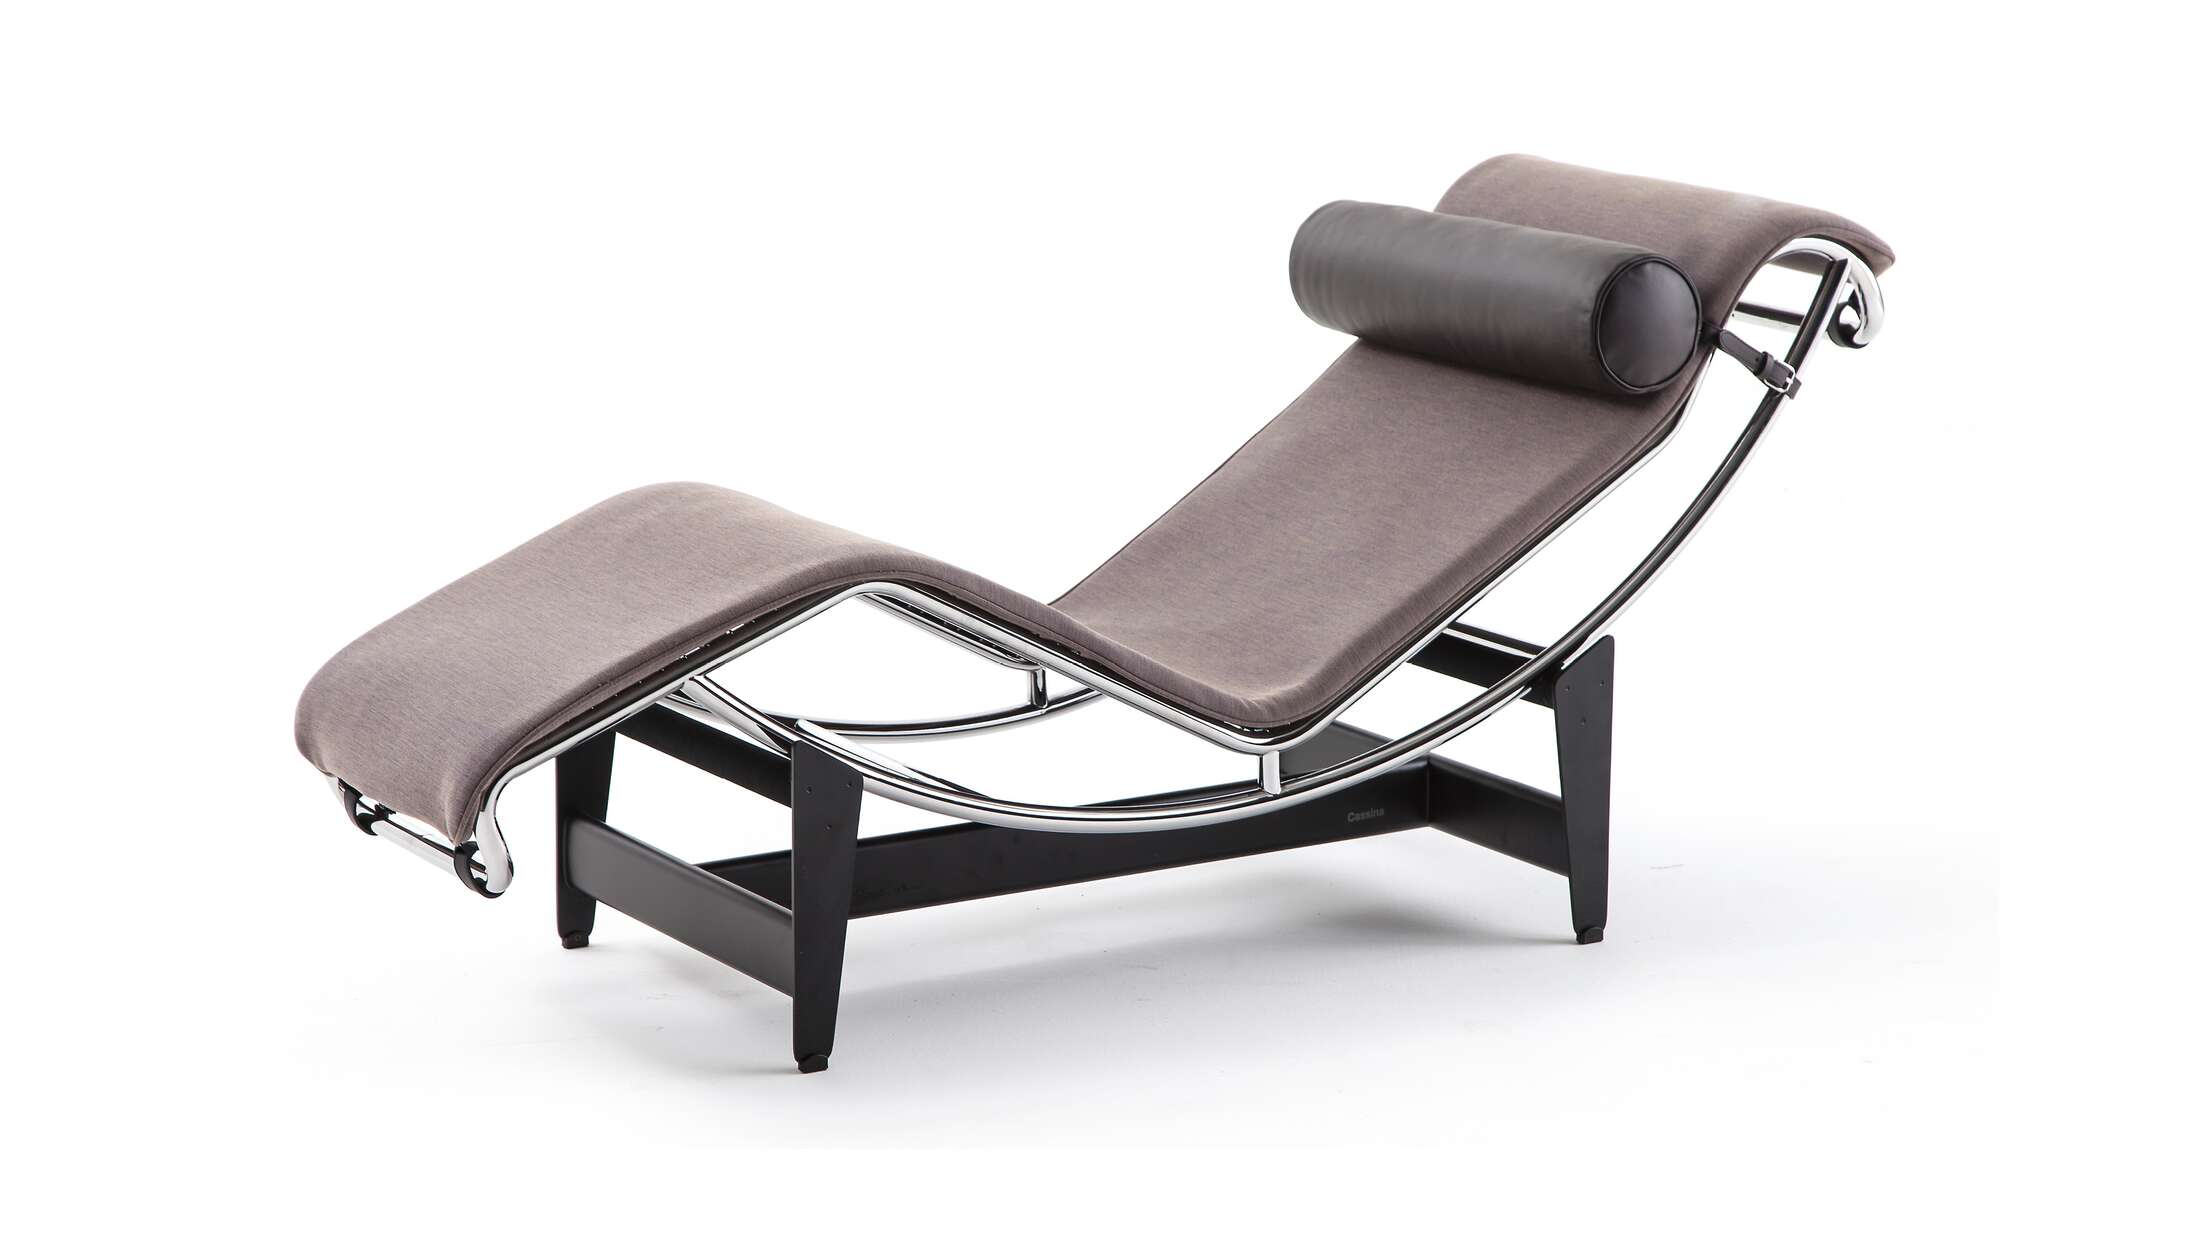 The price given applies to the piece as shown in the first picture. Prices vary dependent on the chosen material. 

Chaise lounge designed by Le Corbusier, Pierre Jeanneret, Charlotte Perriand in 1928. Manufactured by Cassina in Italy. Chaise lounge